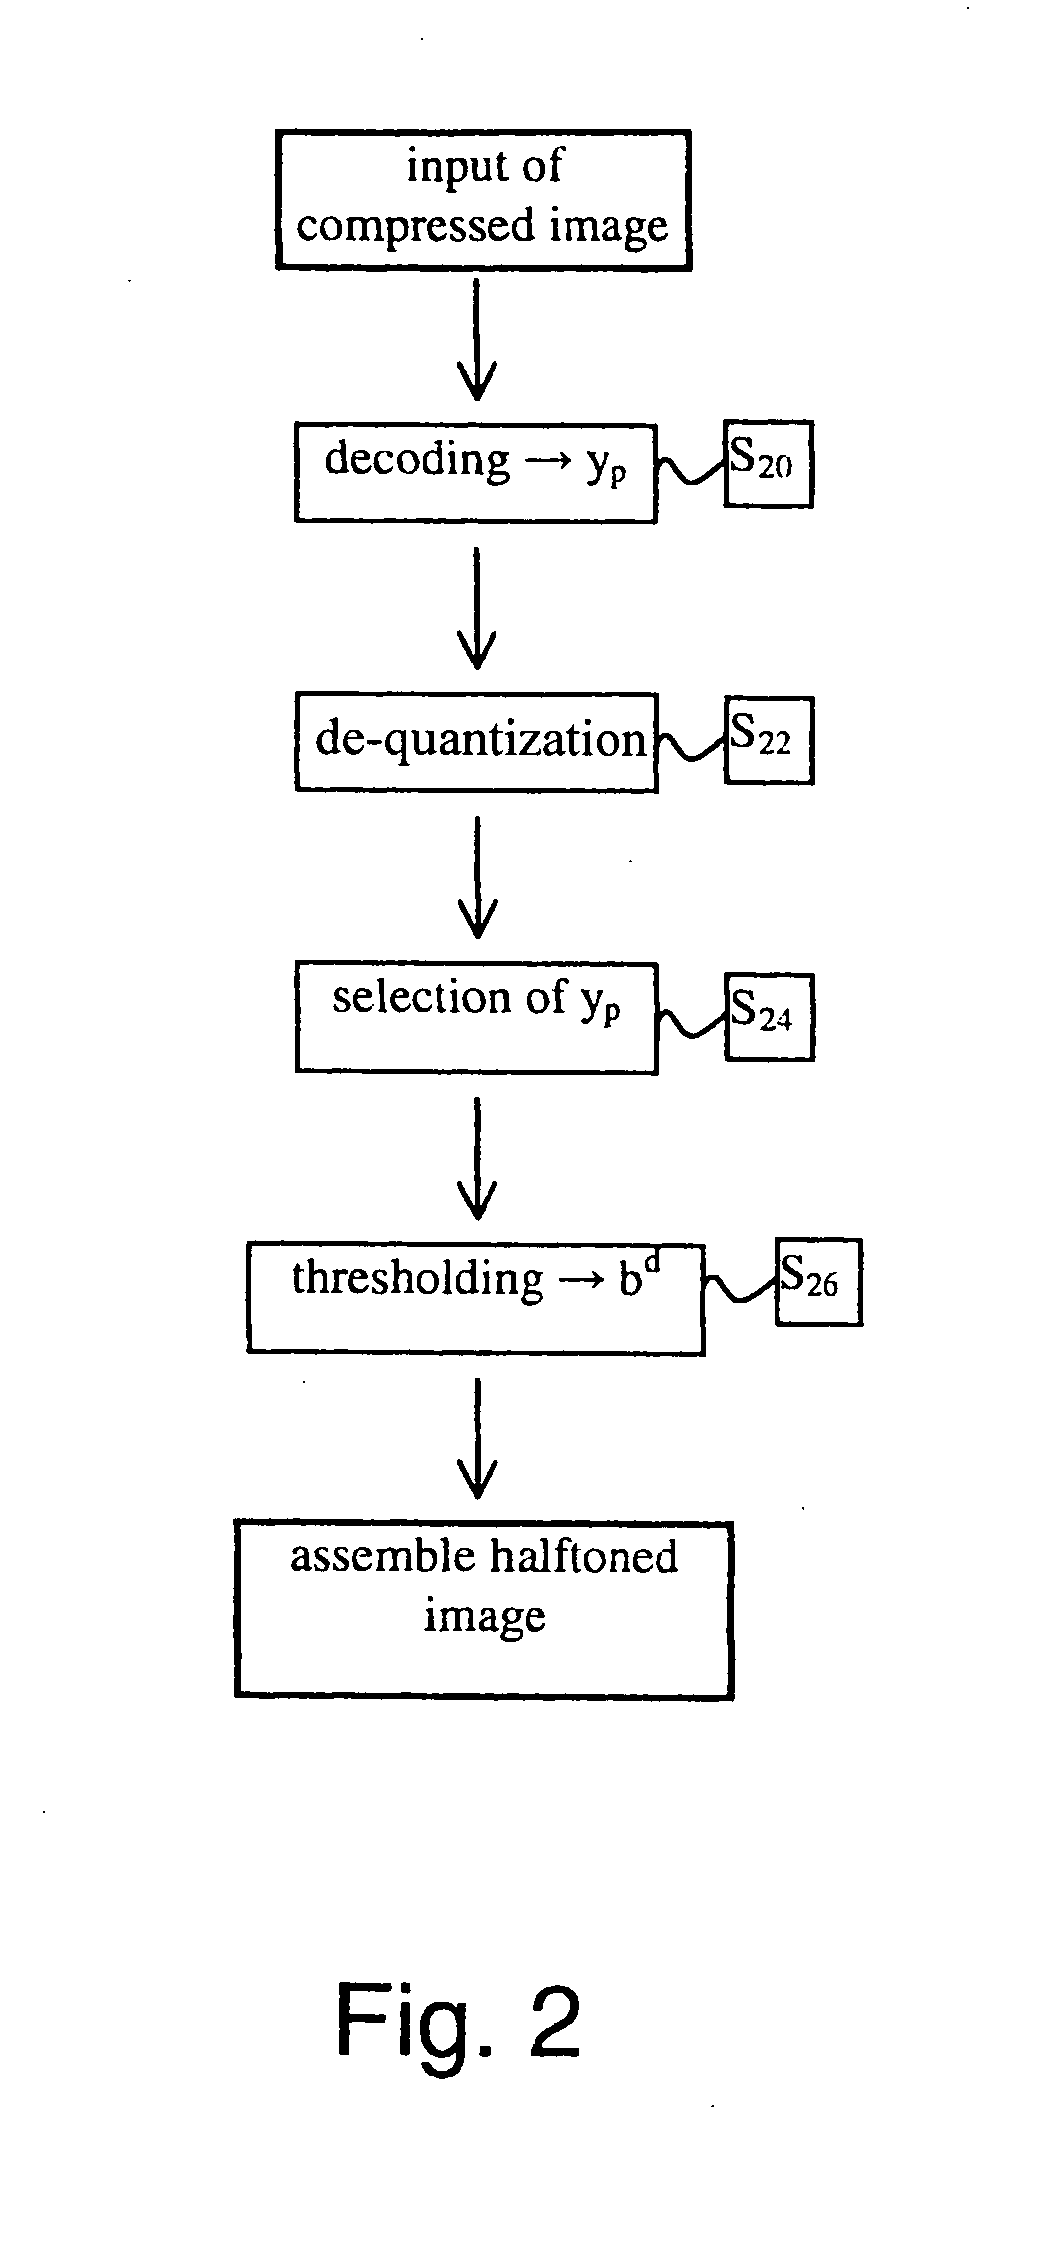 Method and apparatus for generating a halftoned image from a compressed image